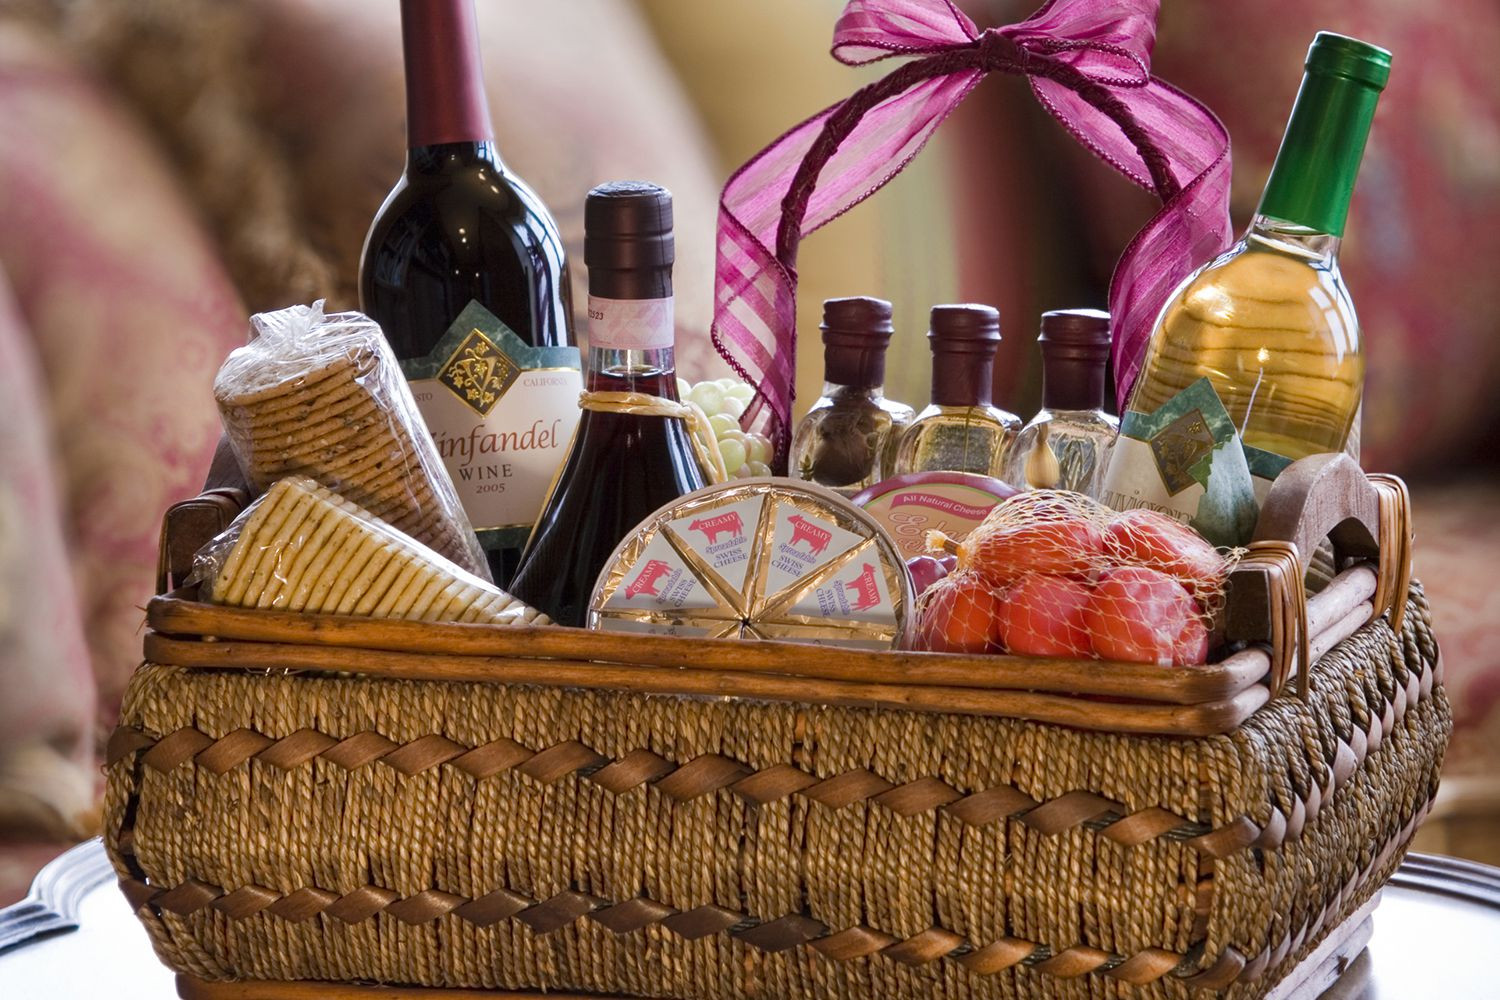 Personalized Gift Basket Ideas
 Make Your Own Personalized Cocktail Gift Basket